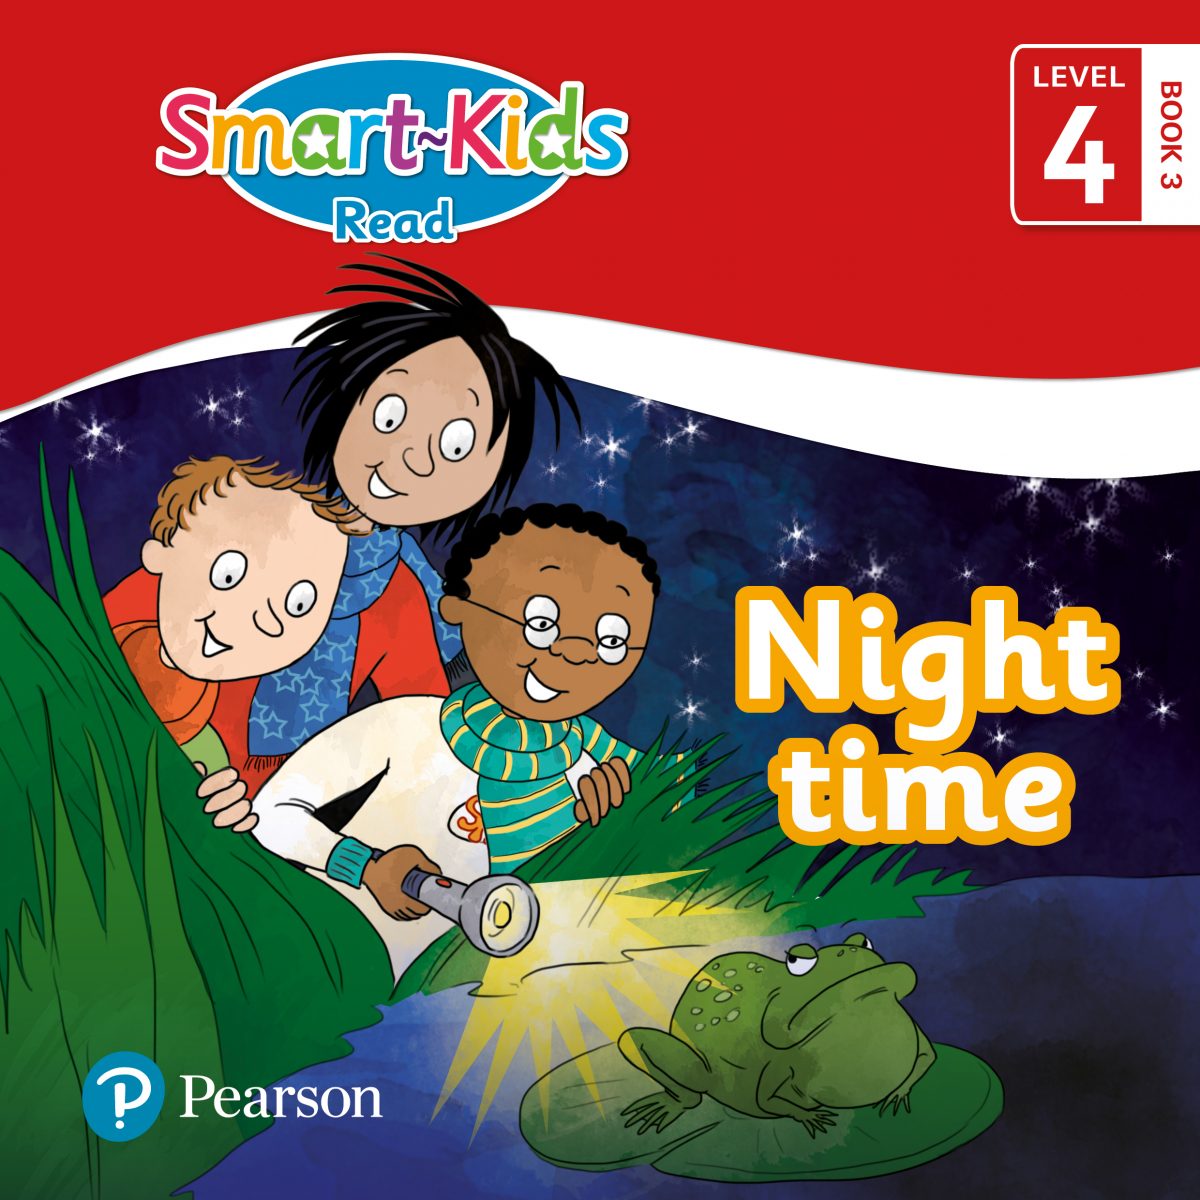 Smart-Kids Read! Level 4 Book 3: Night time